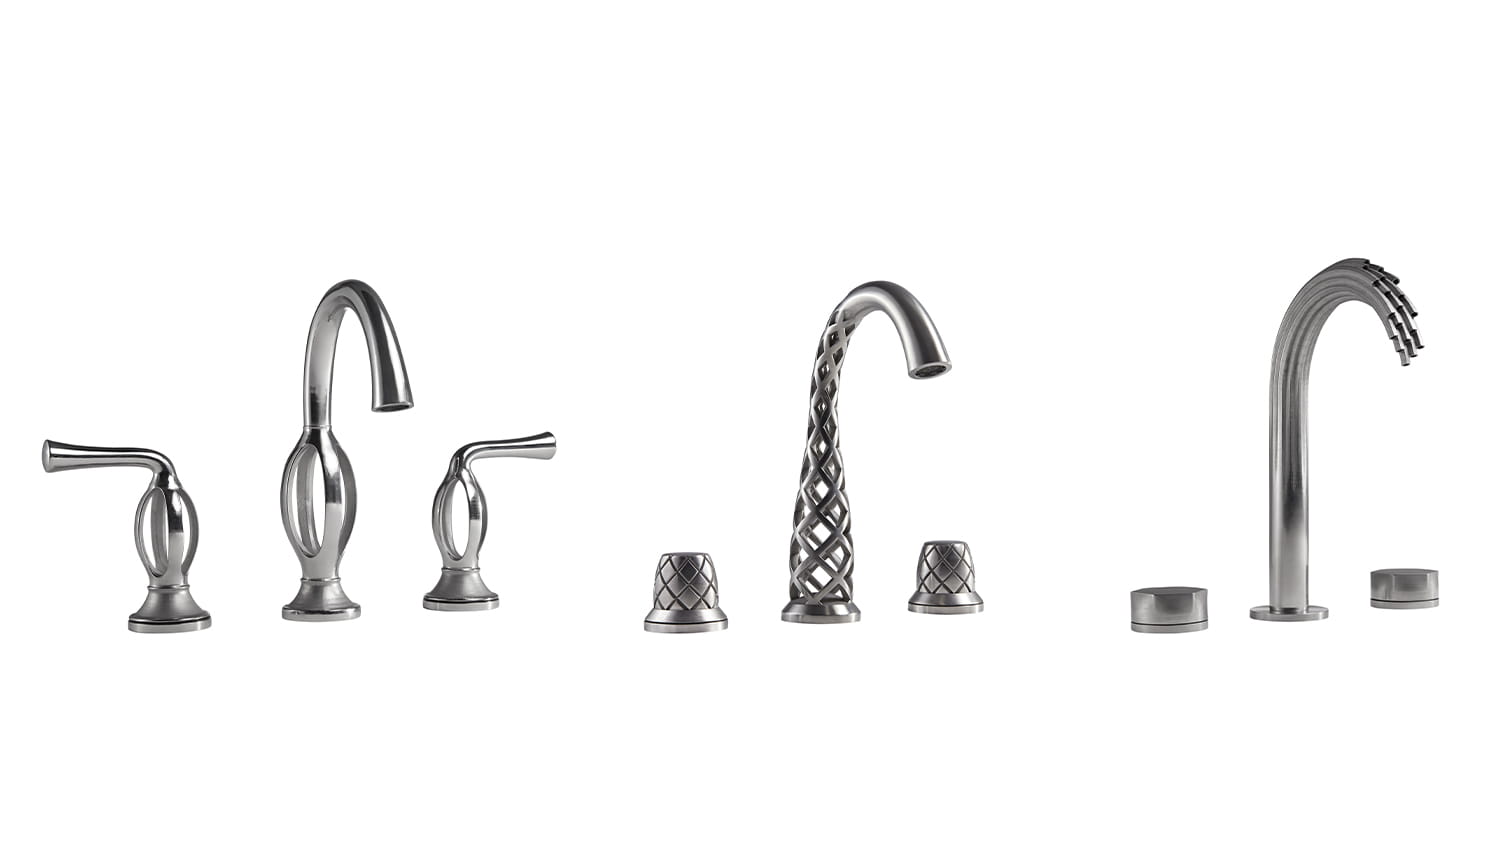 Luxury Faucet Collection from DXV